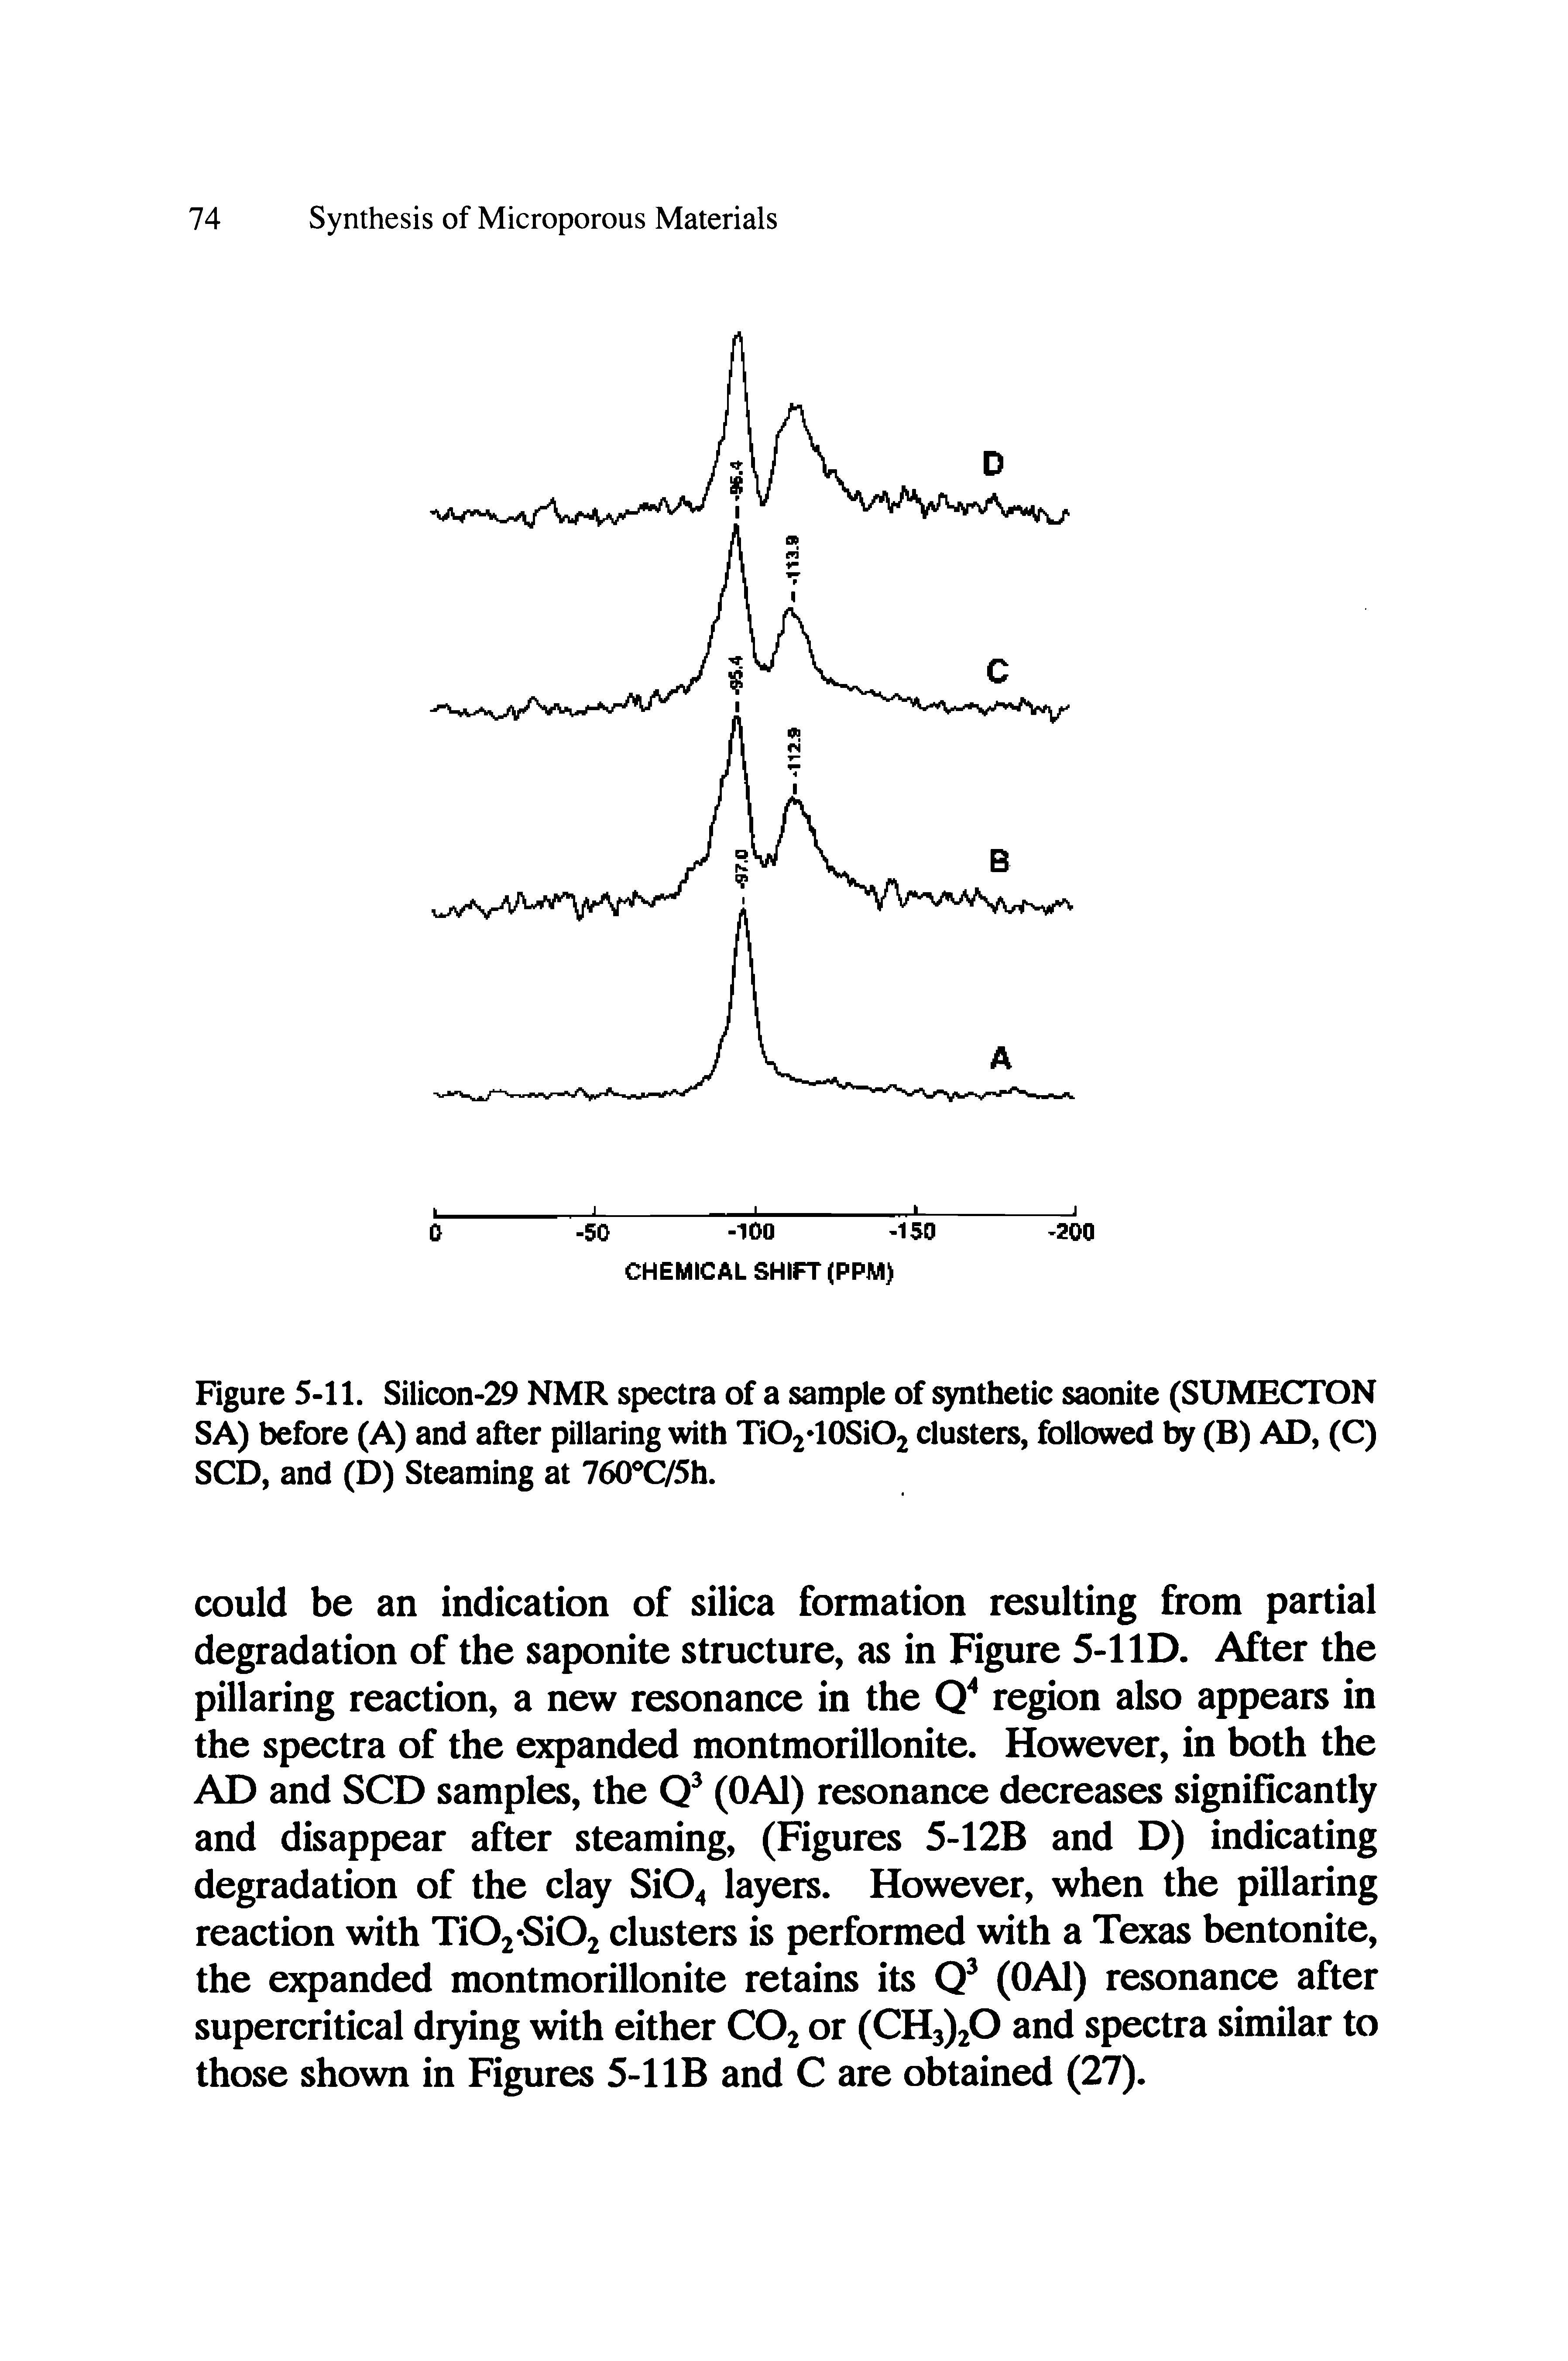 Figure 5-11. Silicon-29 NMR spectra of a sample of thetic saonite (SUMECTON SA) before (A) and after pillaring with TiO2 10SiO2 clusters, followed (B) AD, (C) SCD, and (D) Steaming at 760 C/5h.